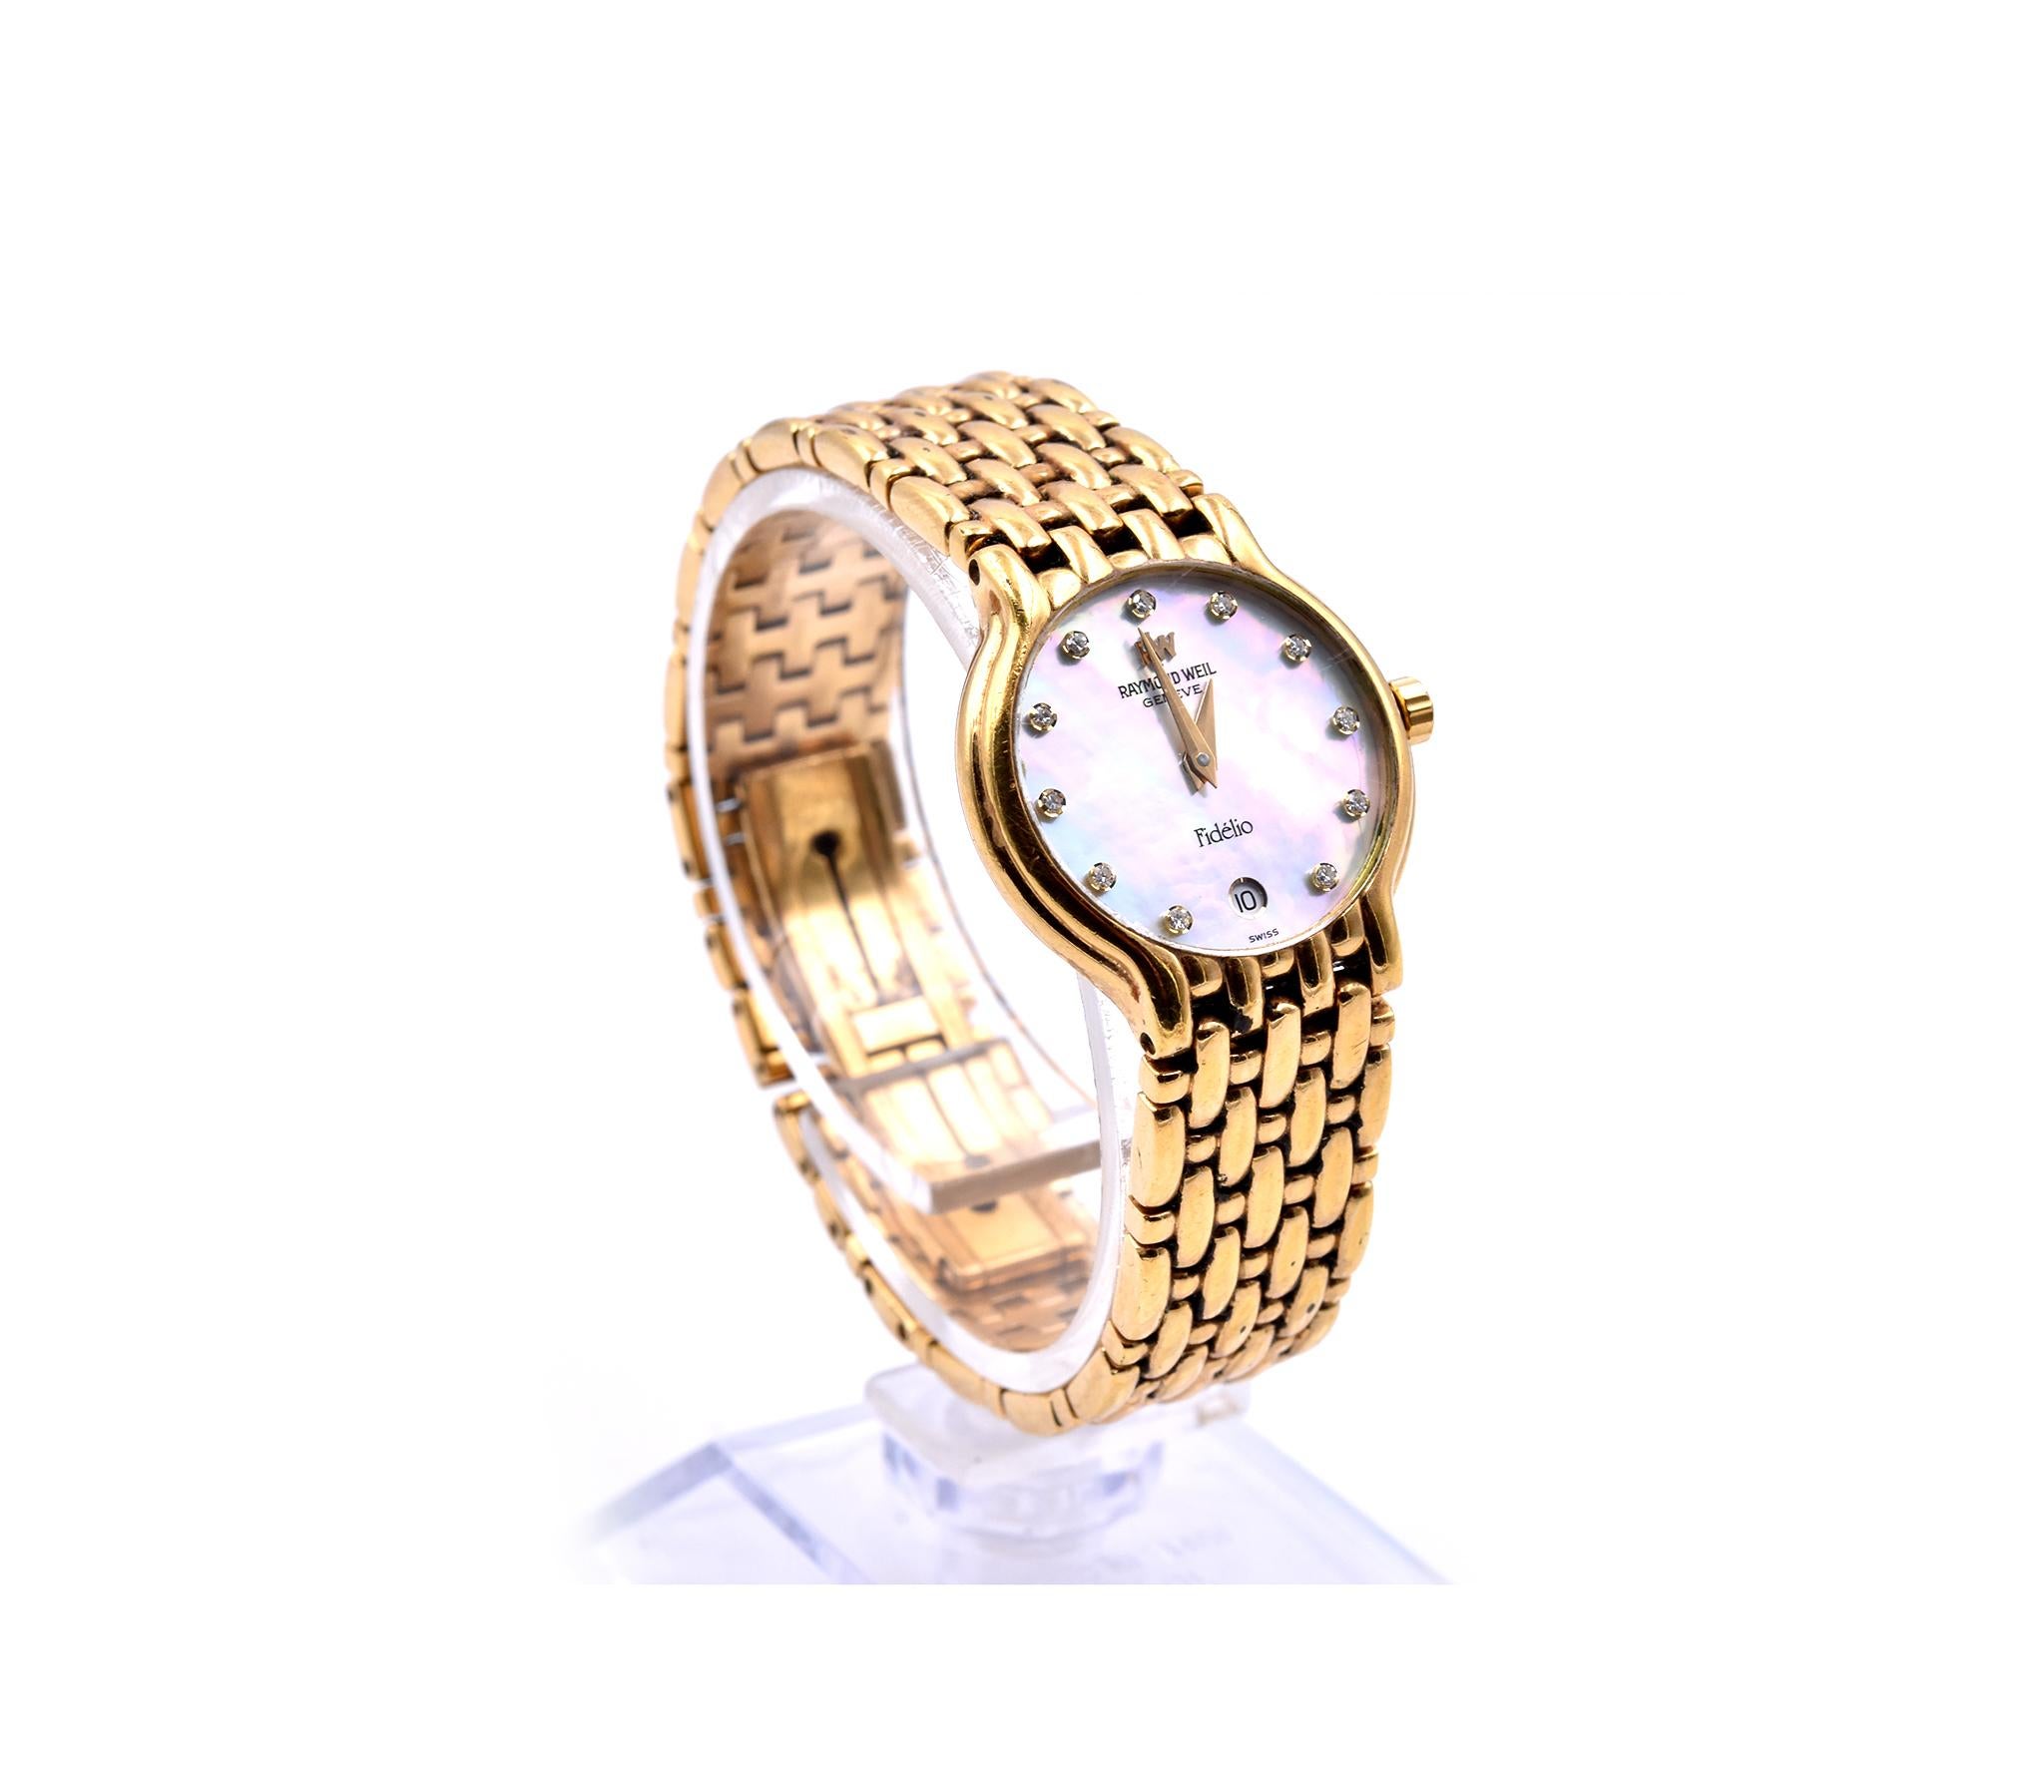 Movement: quartz
Function: hours, minutes, date
Case: 24mm 18k yellow gold-plated case, sapphire protective crystal, push/pull crown
Band: 18k yellow gold-plated bracelet with double fold down clasps
Dial: white MOP dial with diamond hour markers,